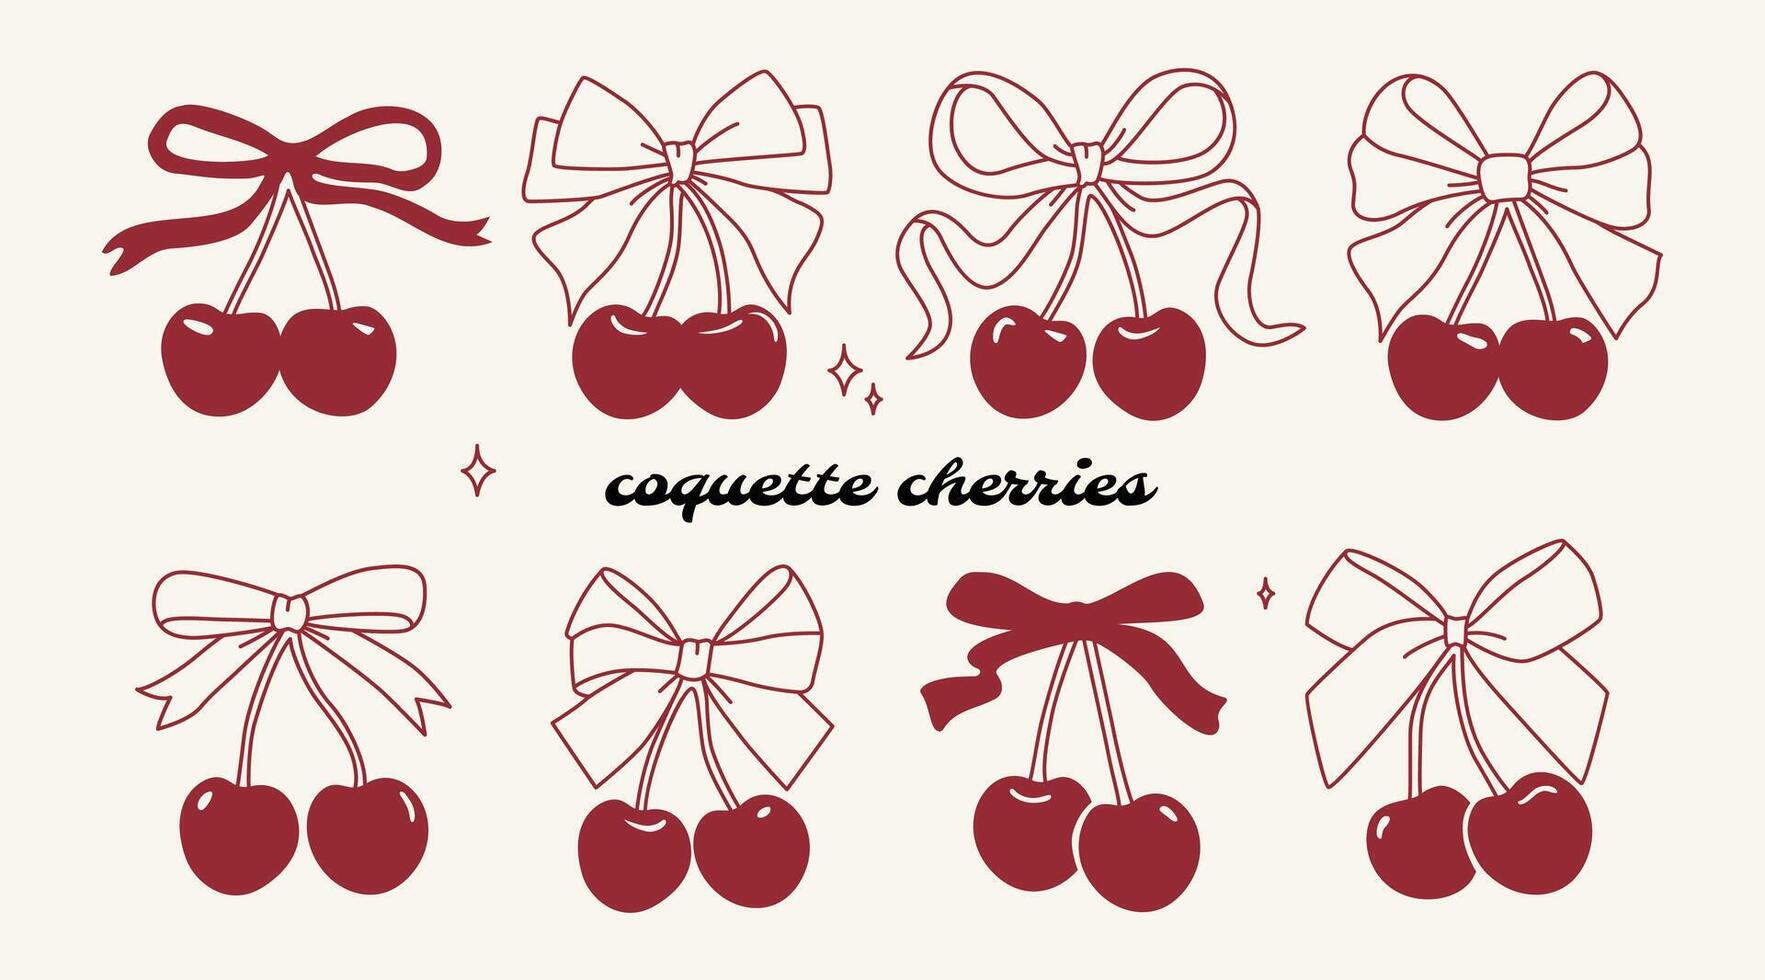 Coquette cherries with gift bow. Cherries with ribbon. Cute trendy line art set vector